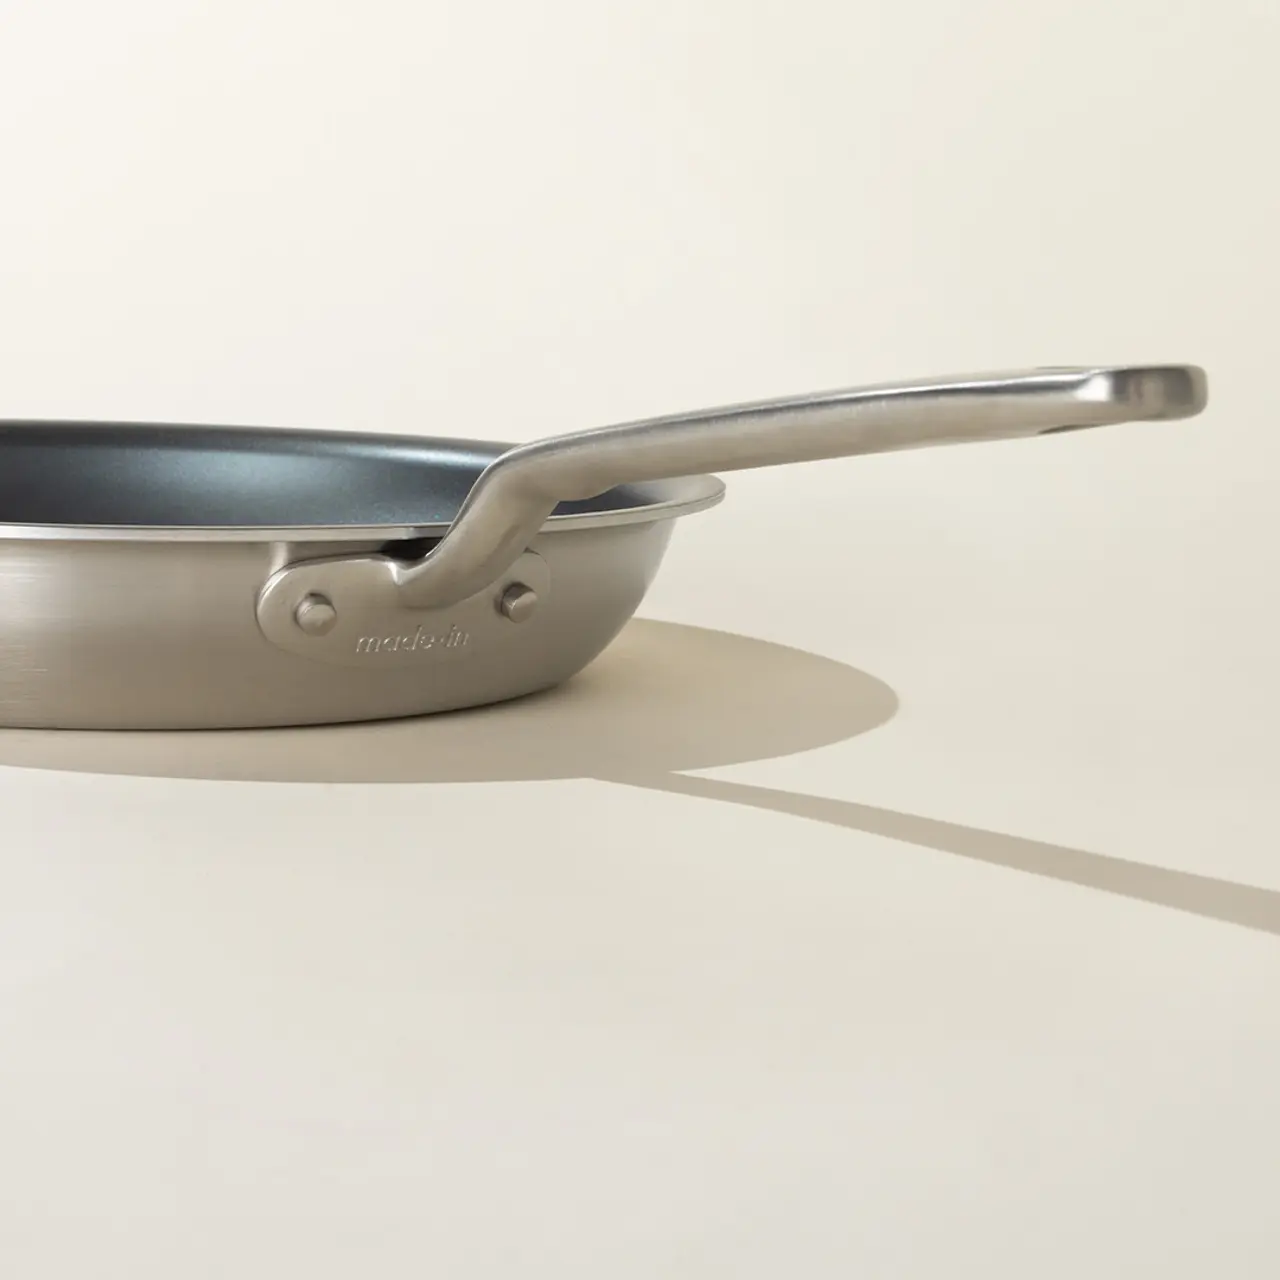 A stainless steel frying pan casts a long shadow on a light-colored background.